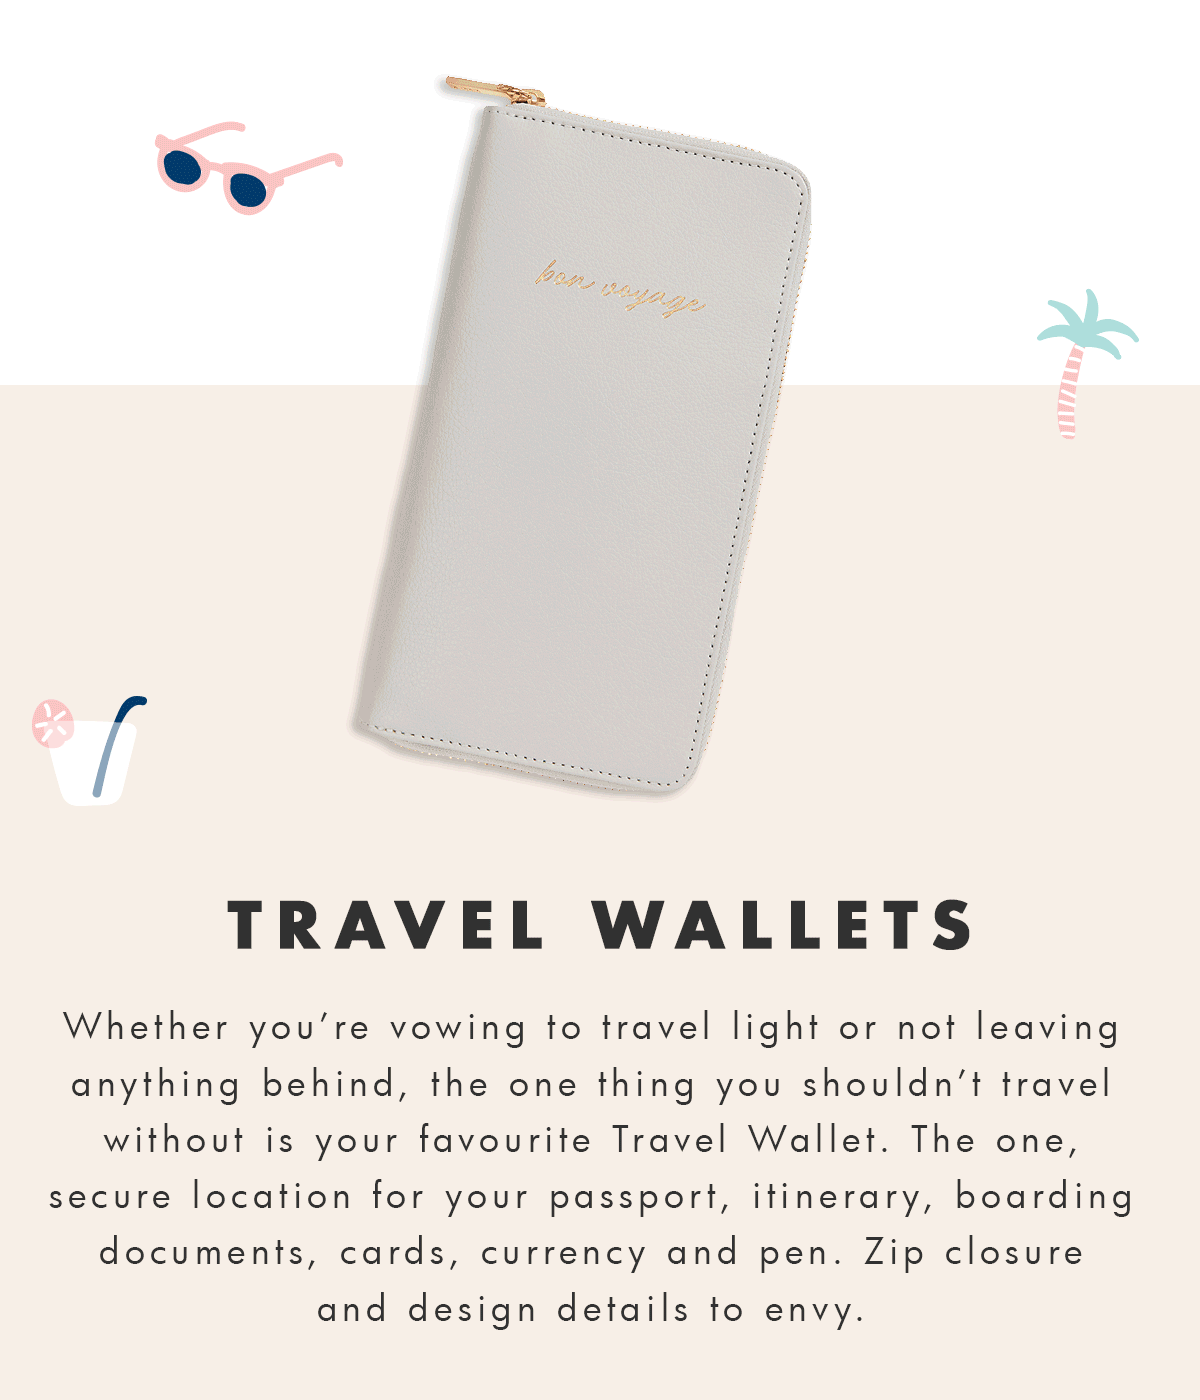 Travel Wallets!